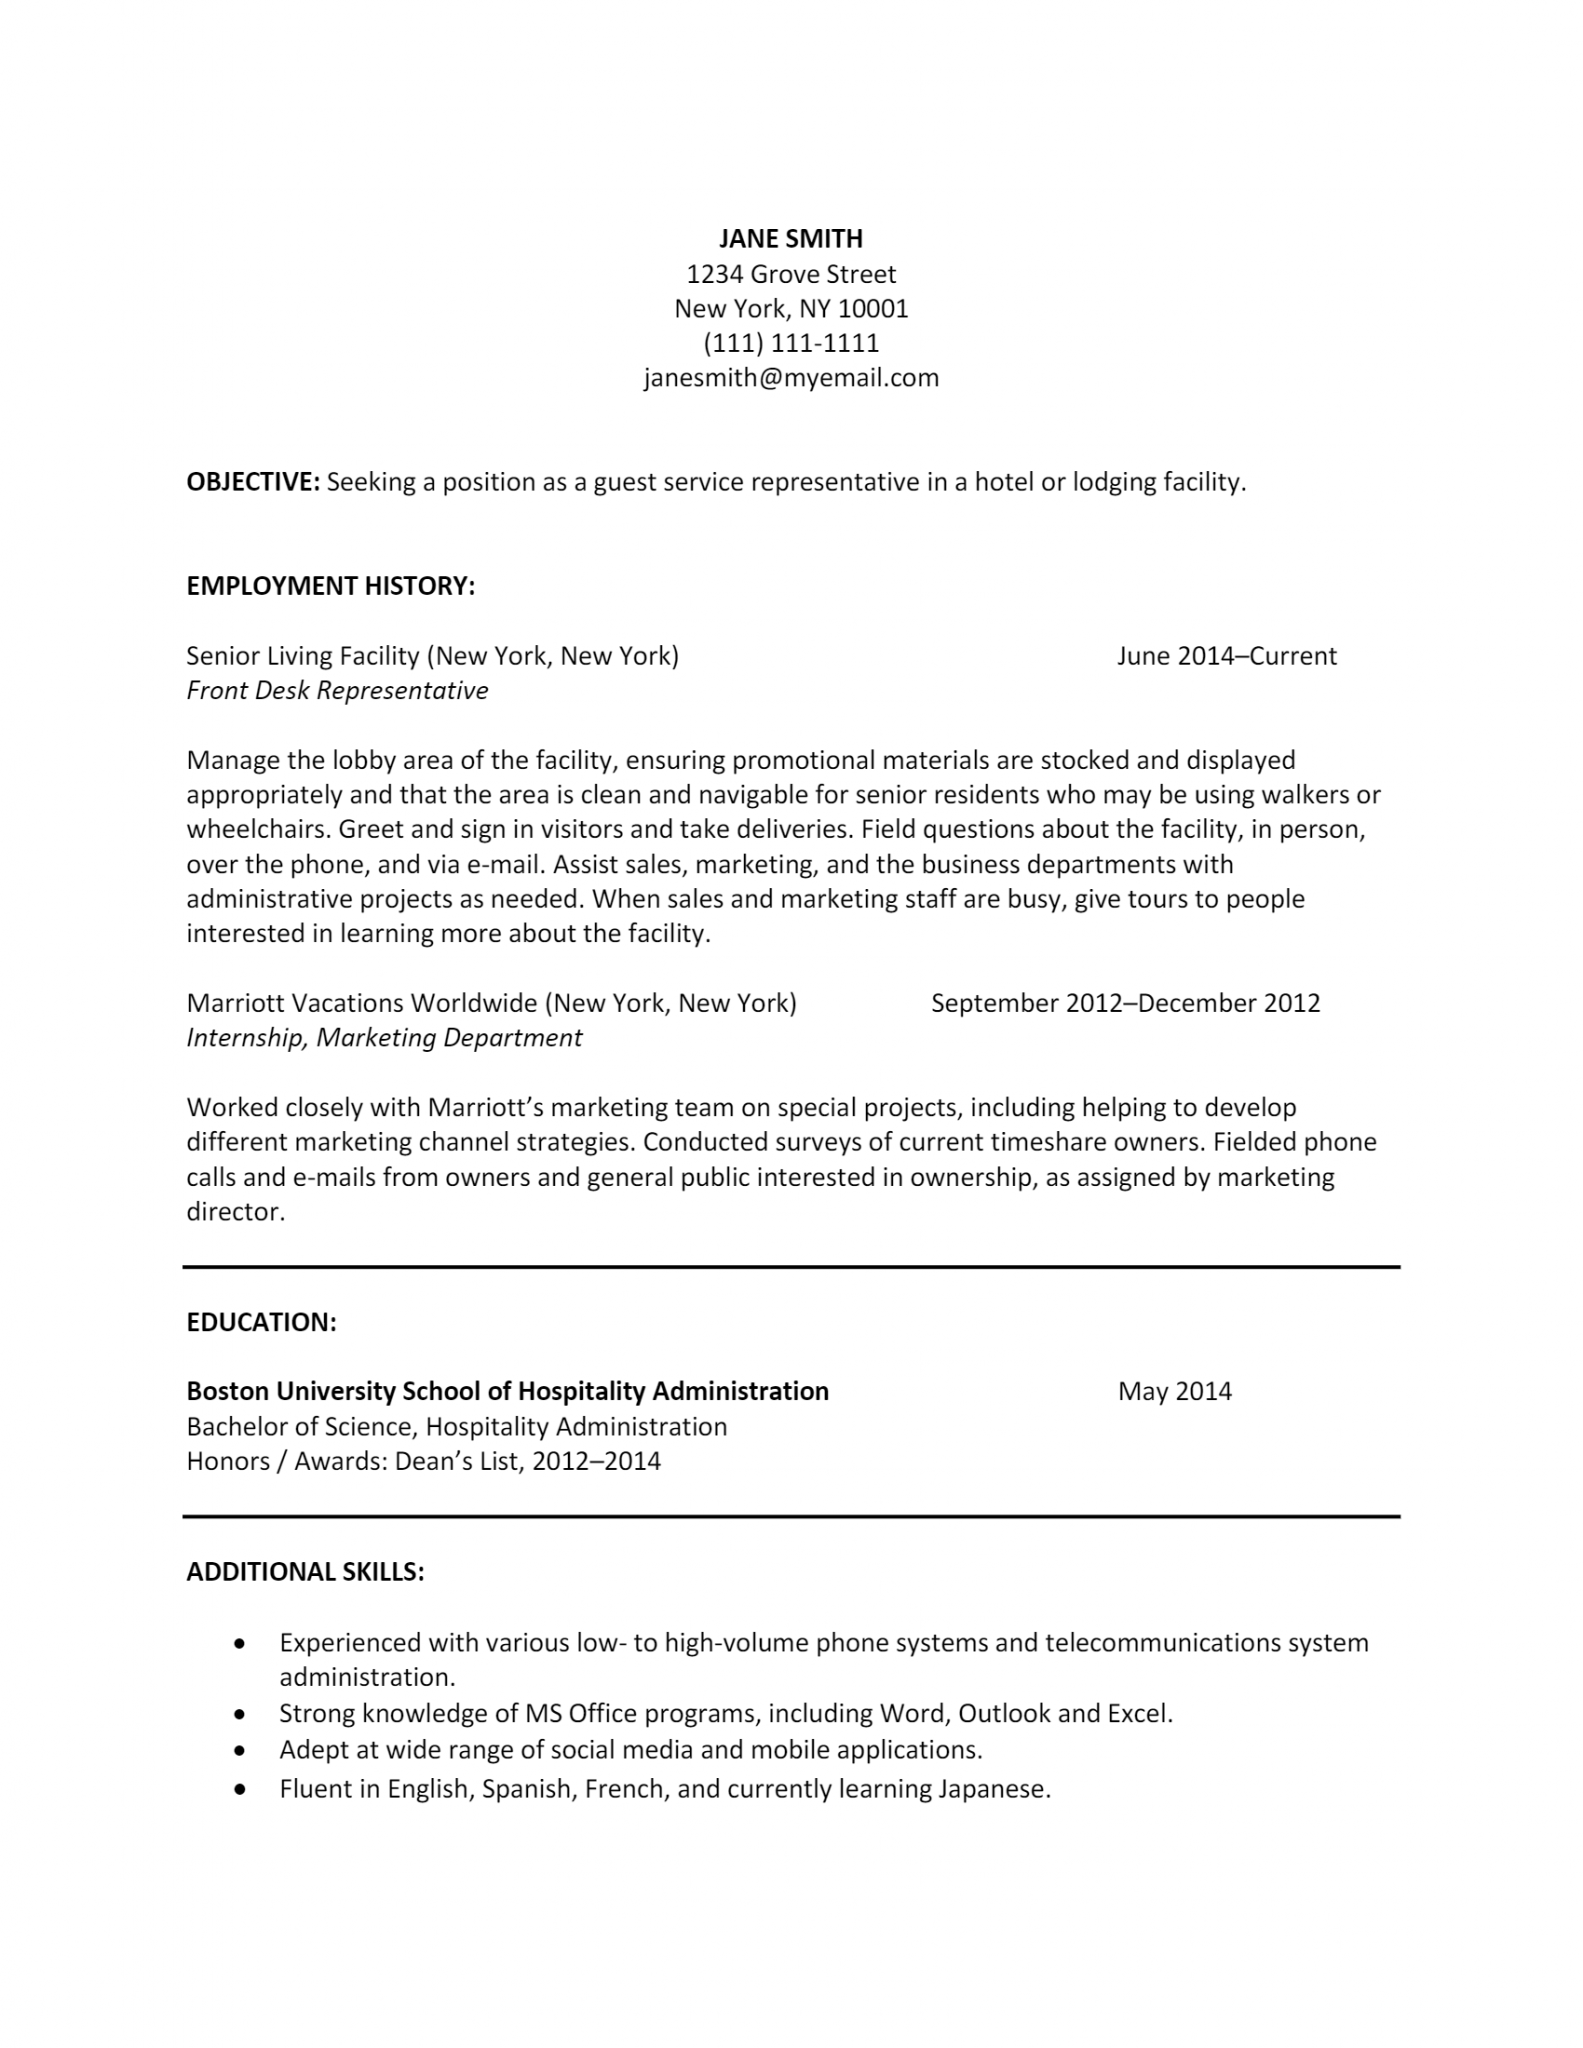 download-free-hospitality-resume-docx-word-template-on